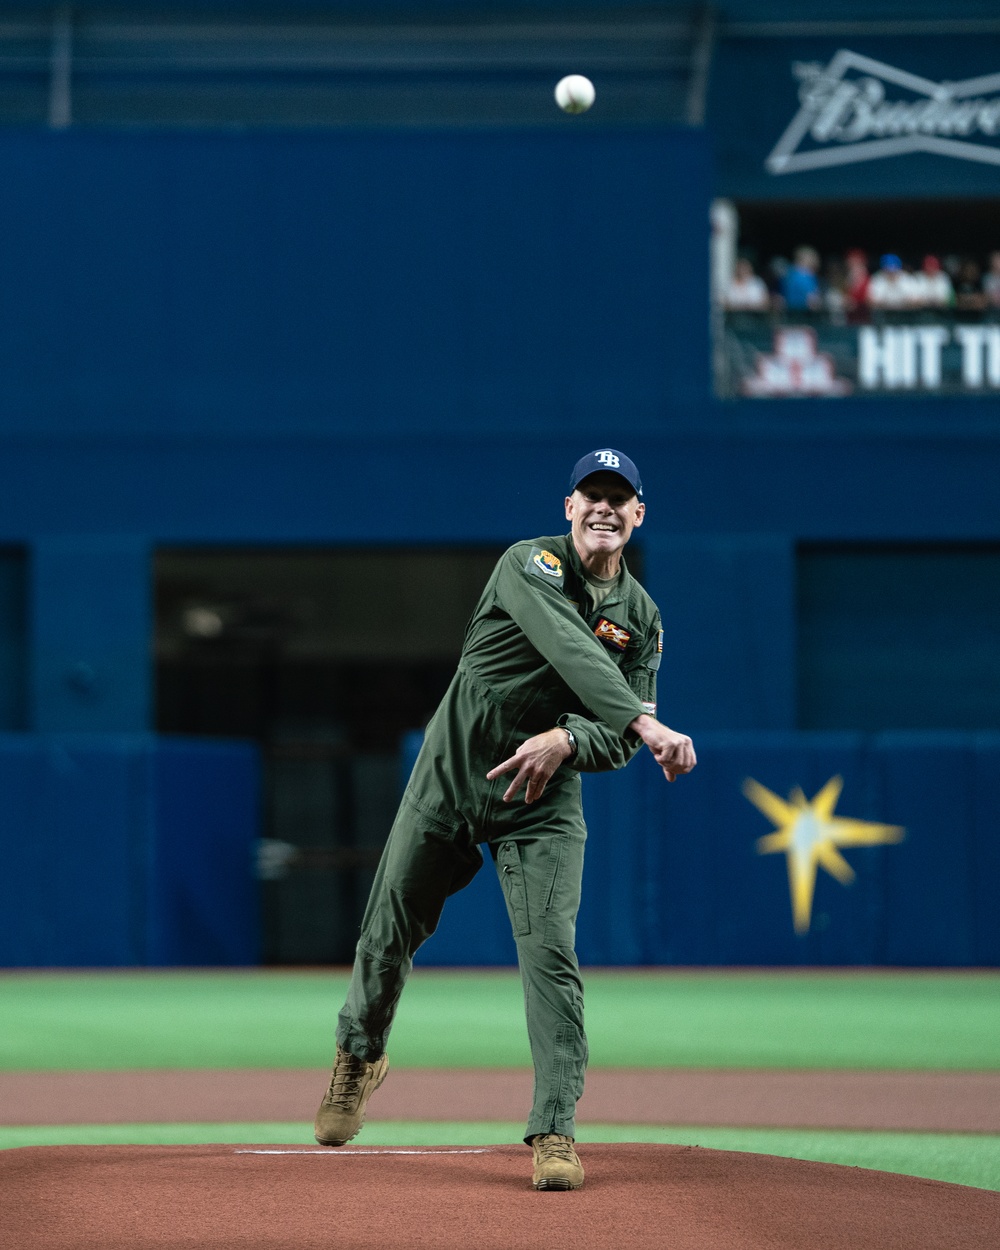 6th ARW commander throws first pitch at Rays game